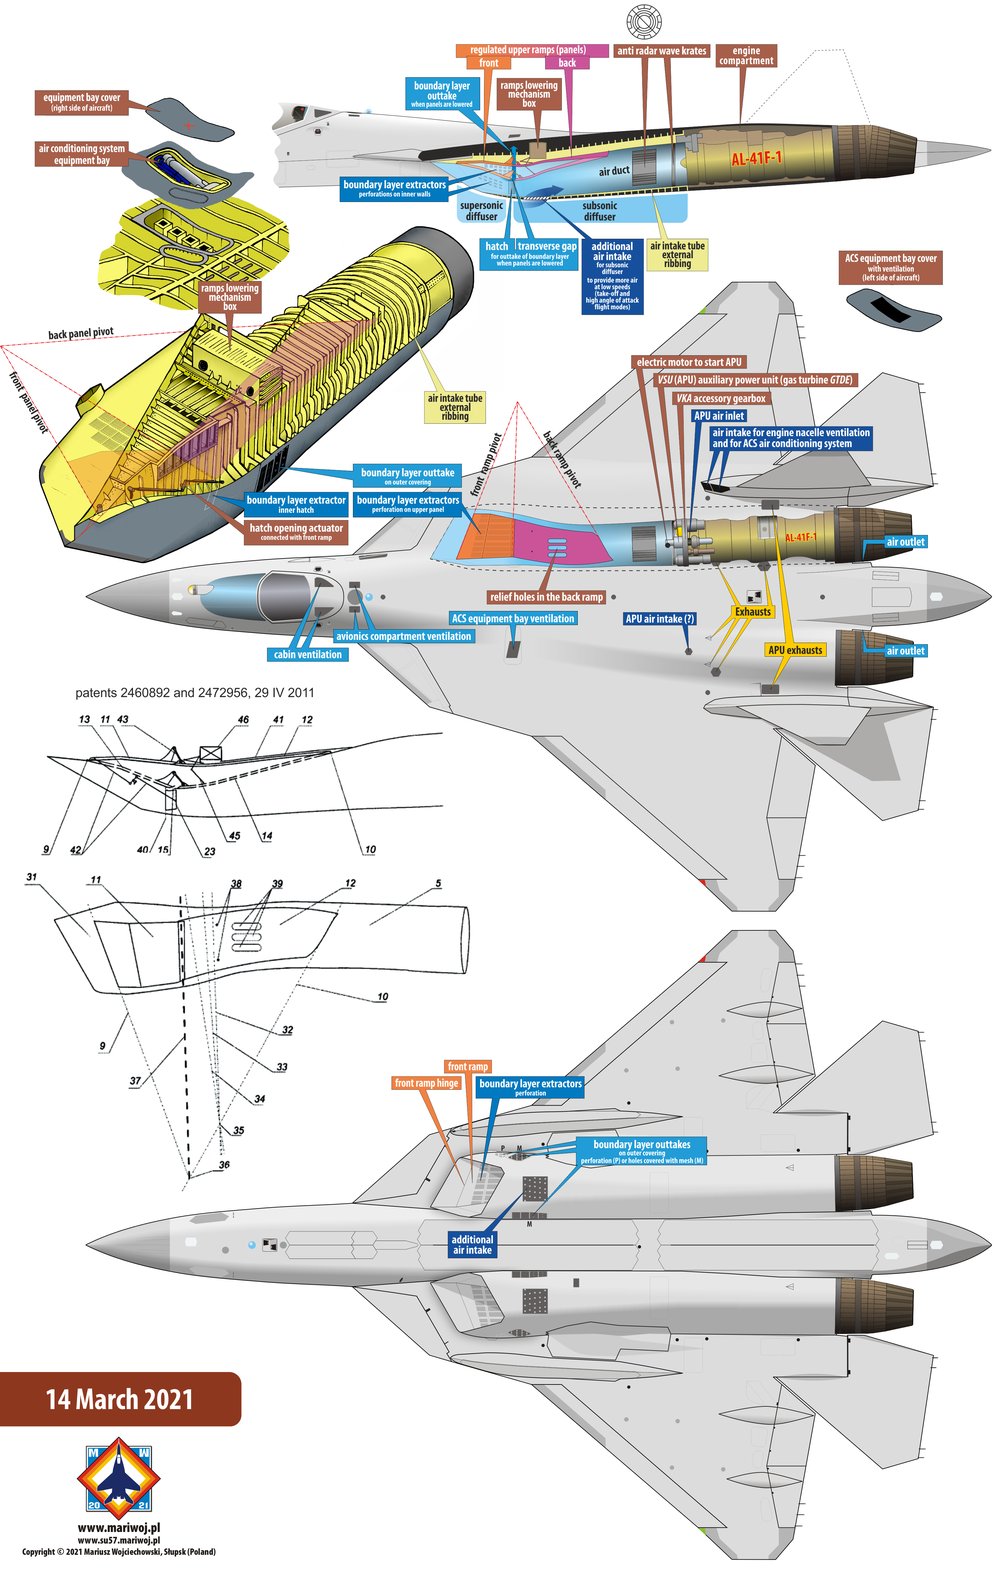 Sukhoi Su-57 technical details - air intake and AL-41F-1 engine